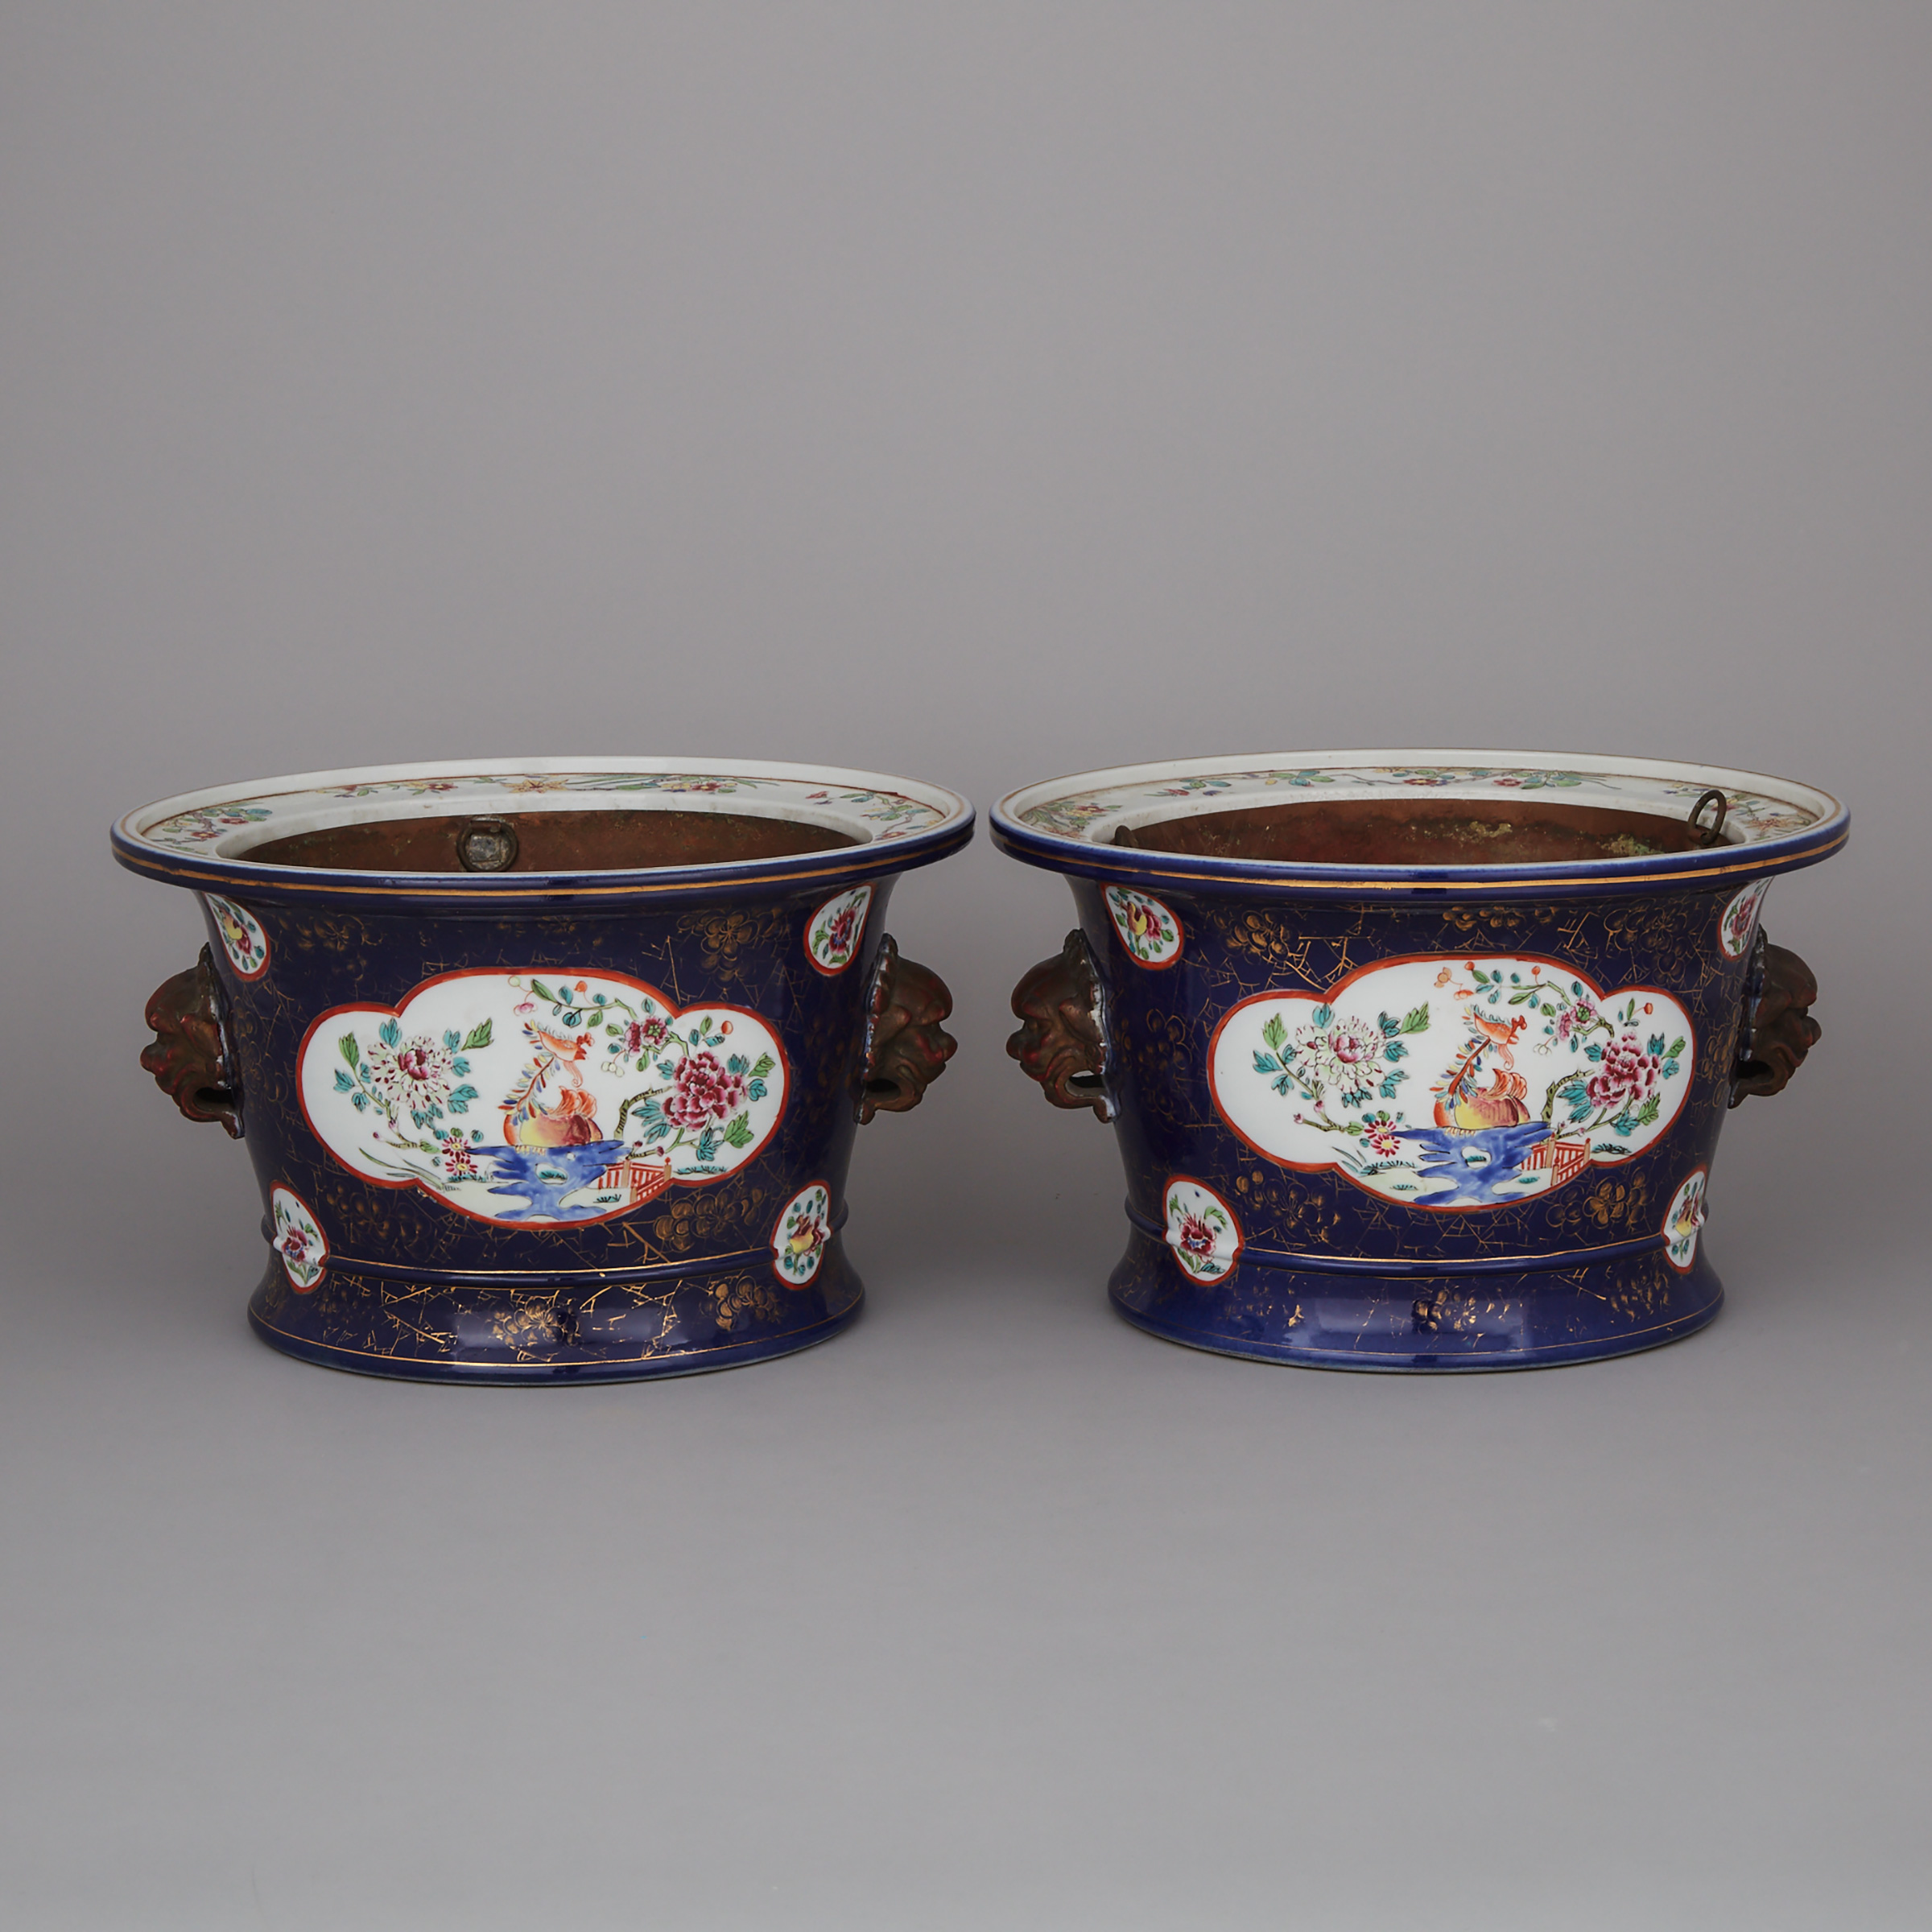 A Pair of Chinese Famille Rose & Powder Blue Glaze Fish Bowl Jardinieres, 18th/19th Century